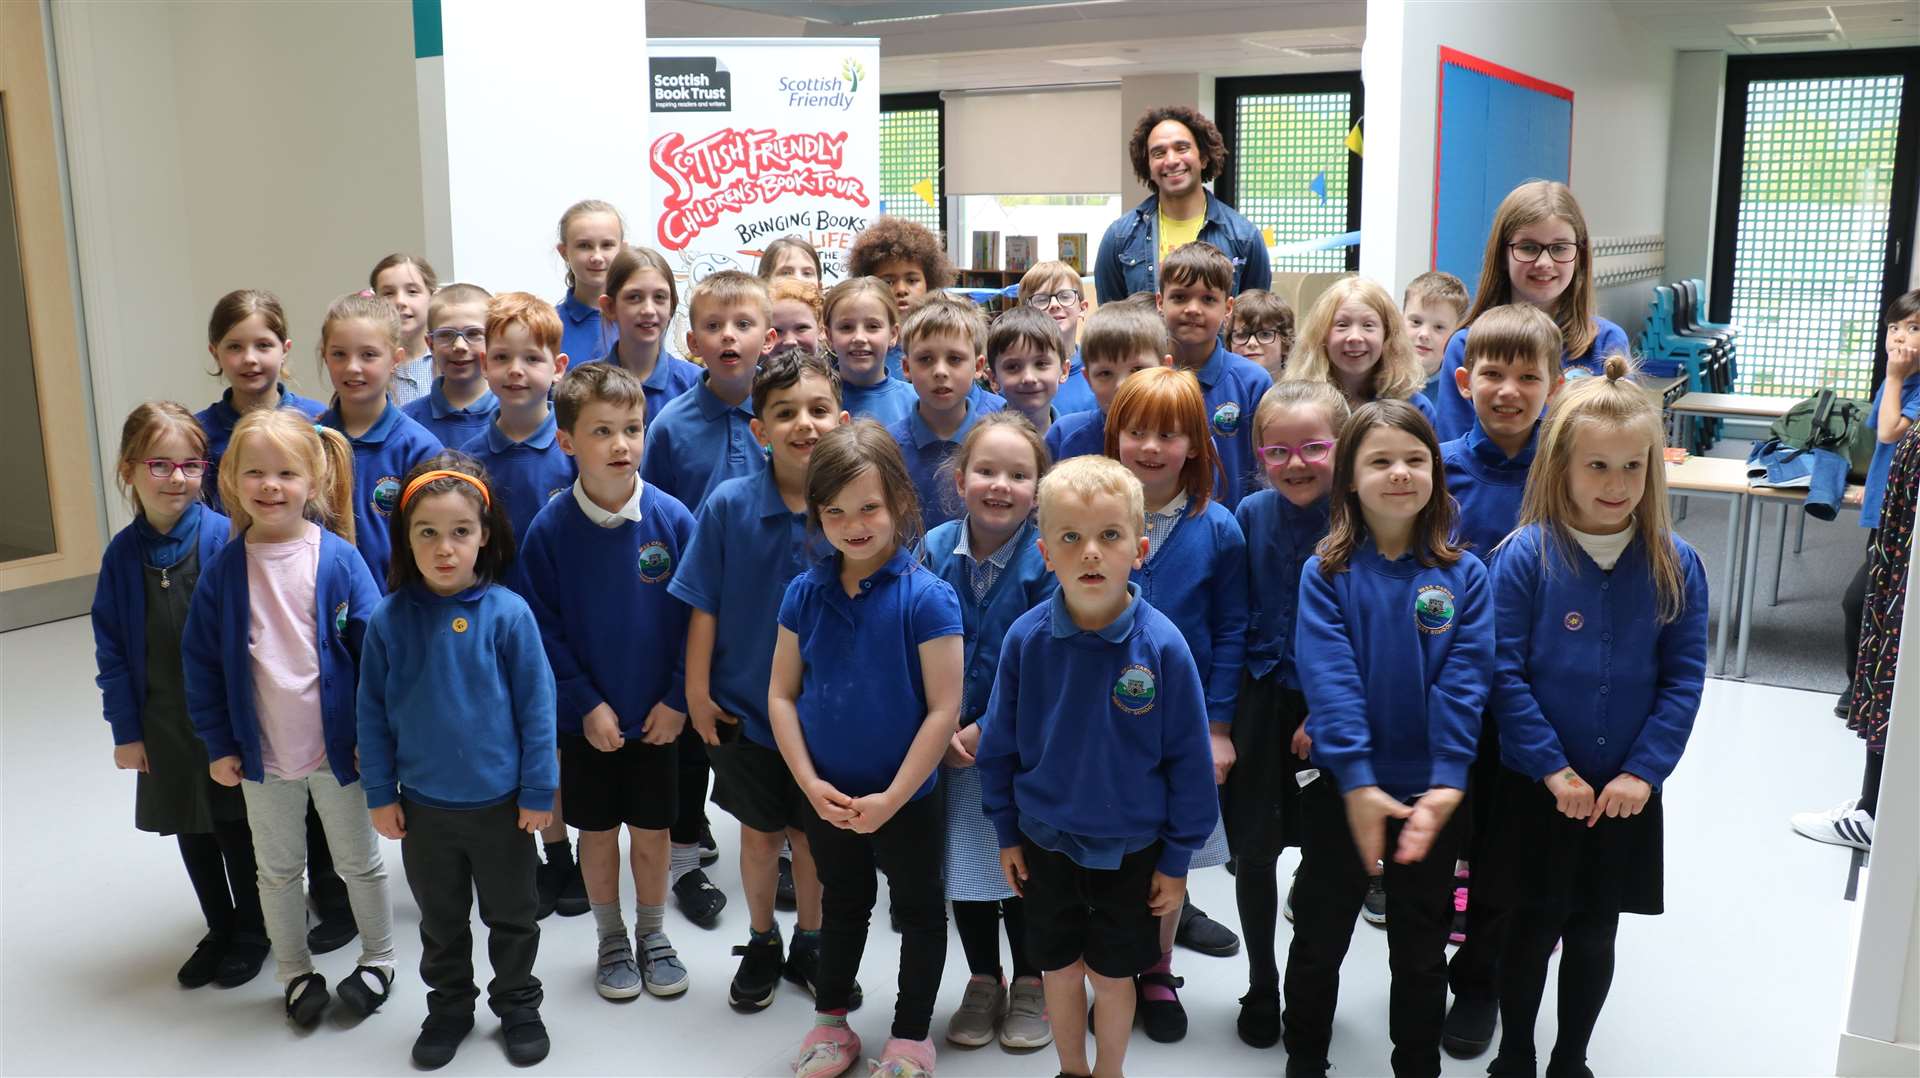 Joseph Coelho opened the brand-new school library at Ness Castle Primary.